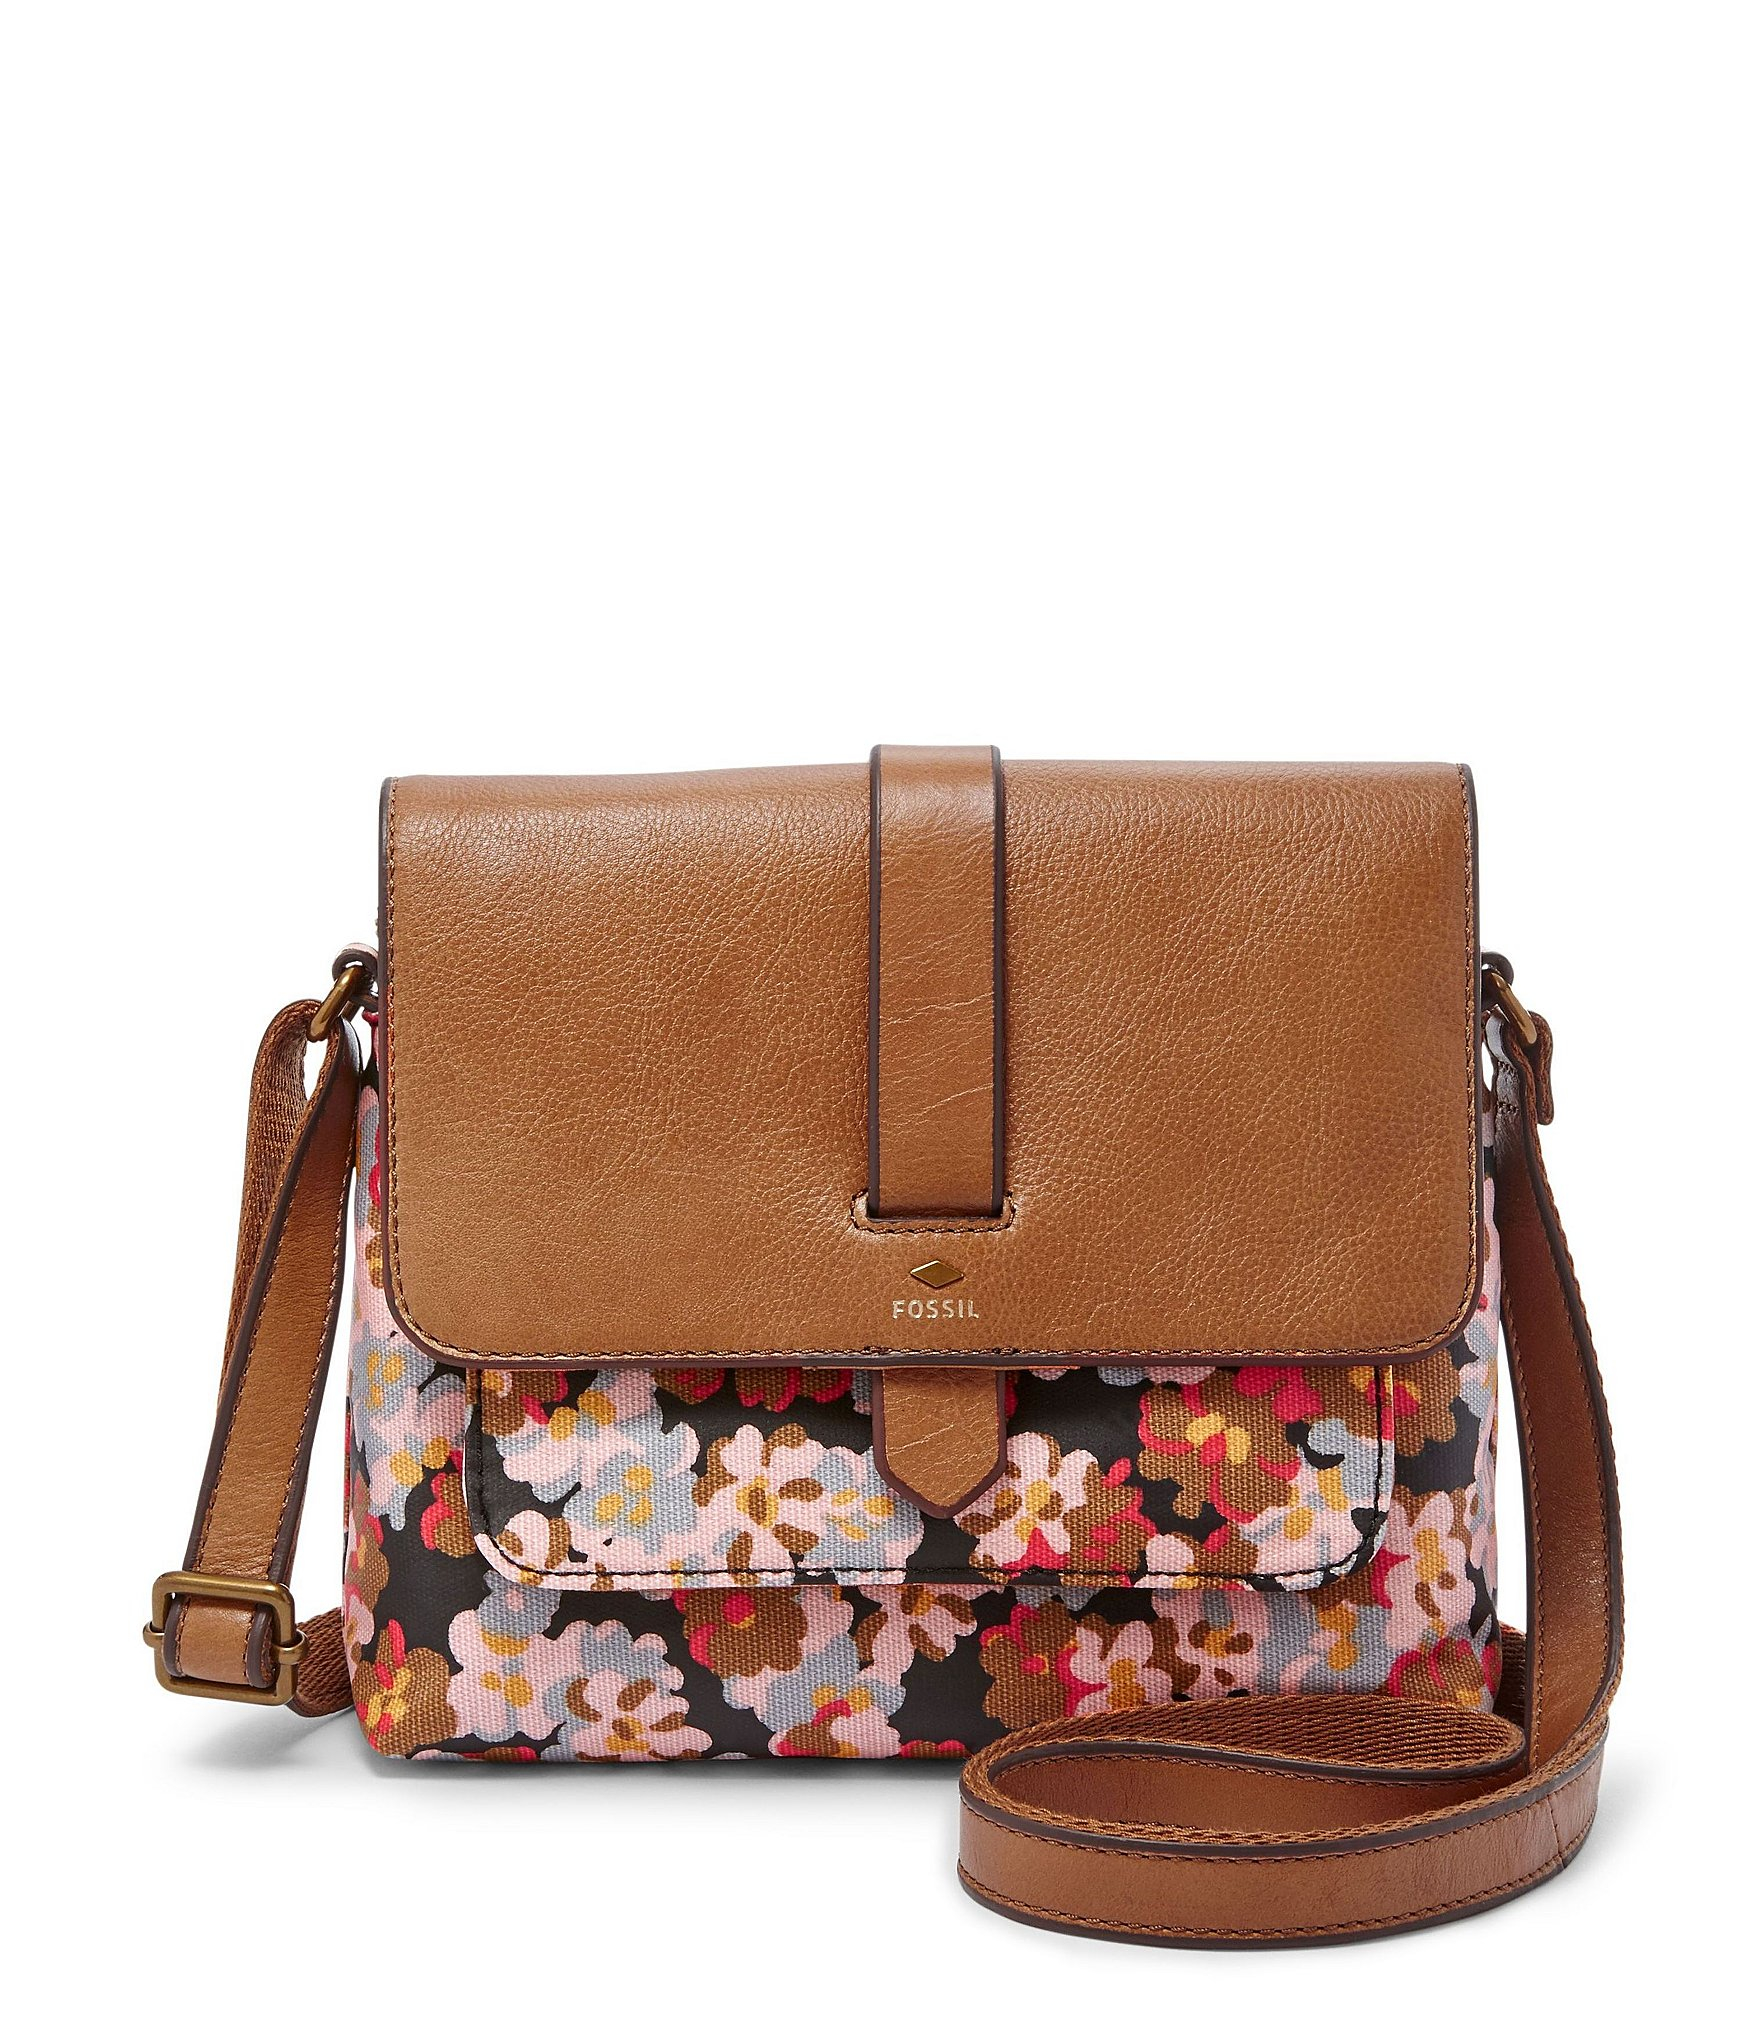 Lyst - Fossil Kinley Floral Small Cross-body Bag in Brown